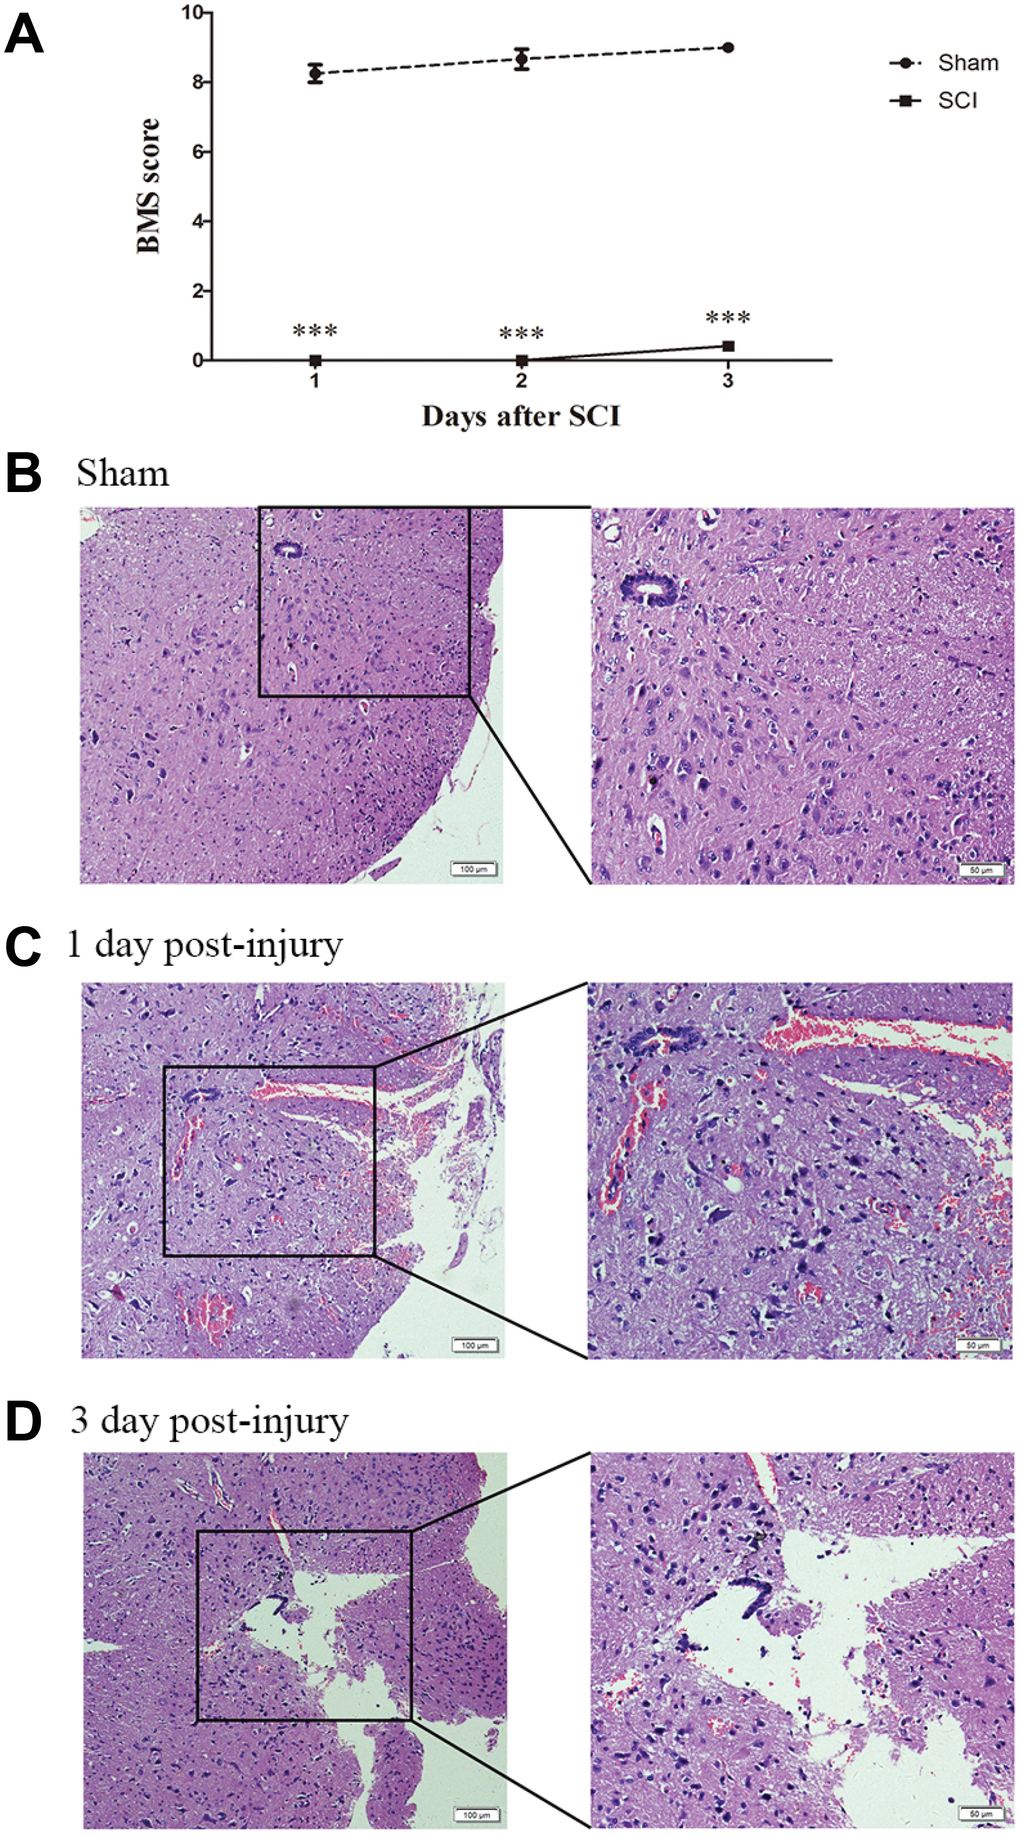 Establishment of SCI animal model. (A) BMS scores indicate the motor functional index 3 days after SCI. ***PB–D) H&E staining of spinal cord samples from the sham and SCI groups at days 1 and 3 postsurgery.